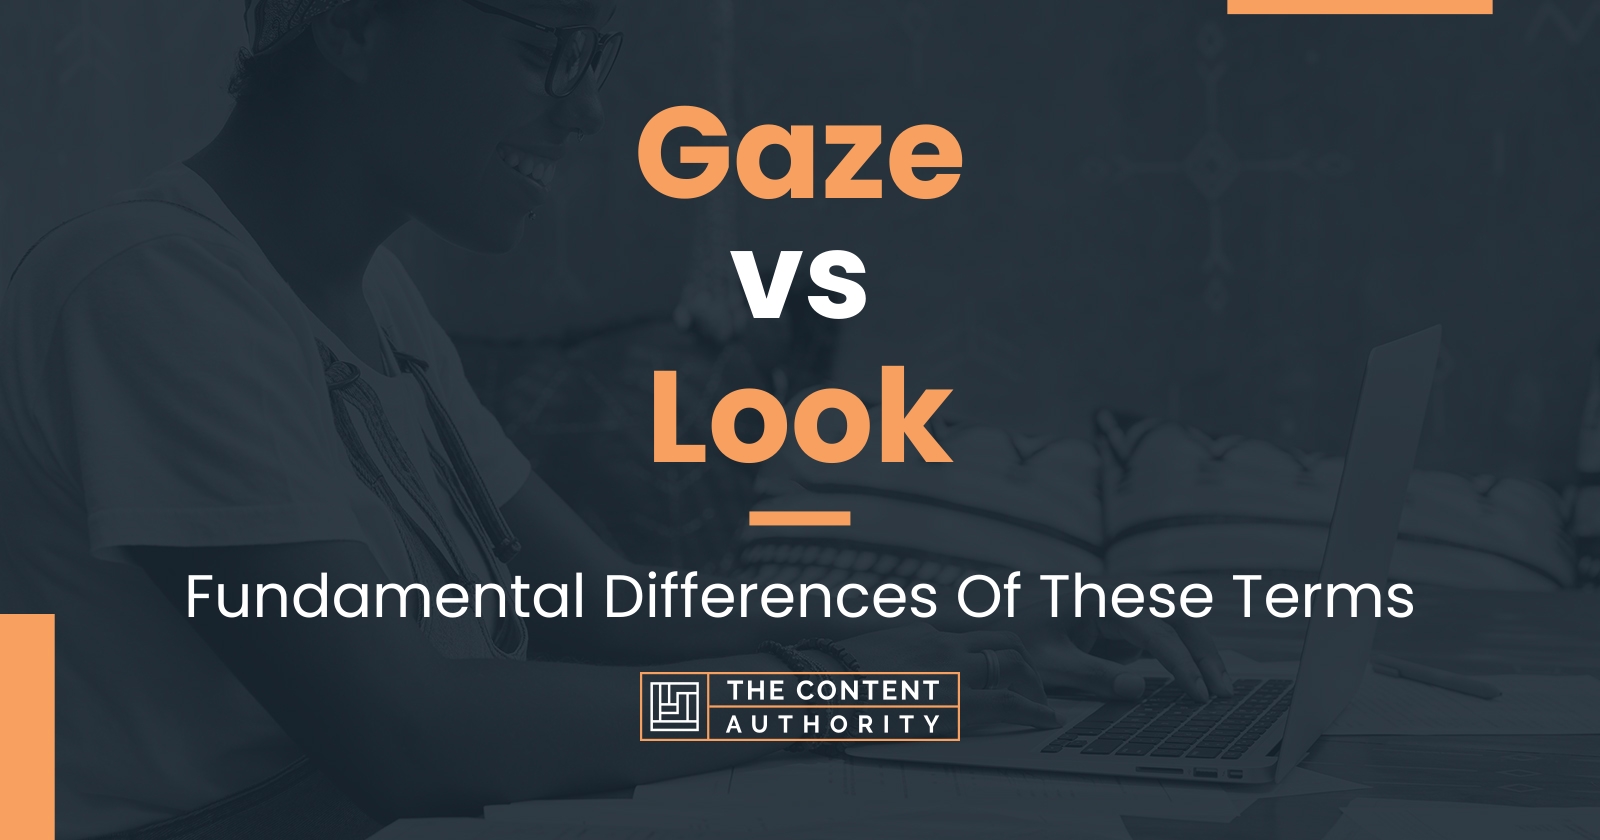 Gaze vs Look: Fundamental Differences Of These Terms